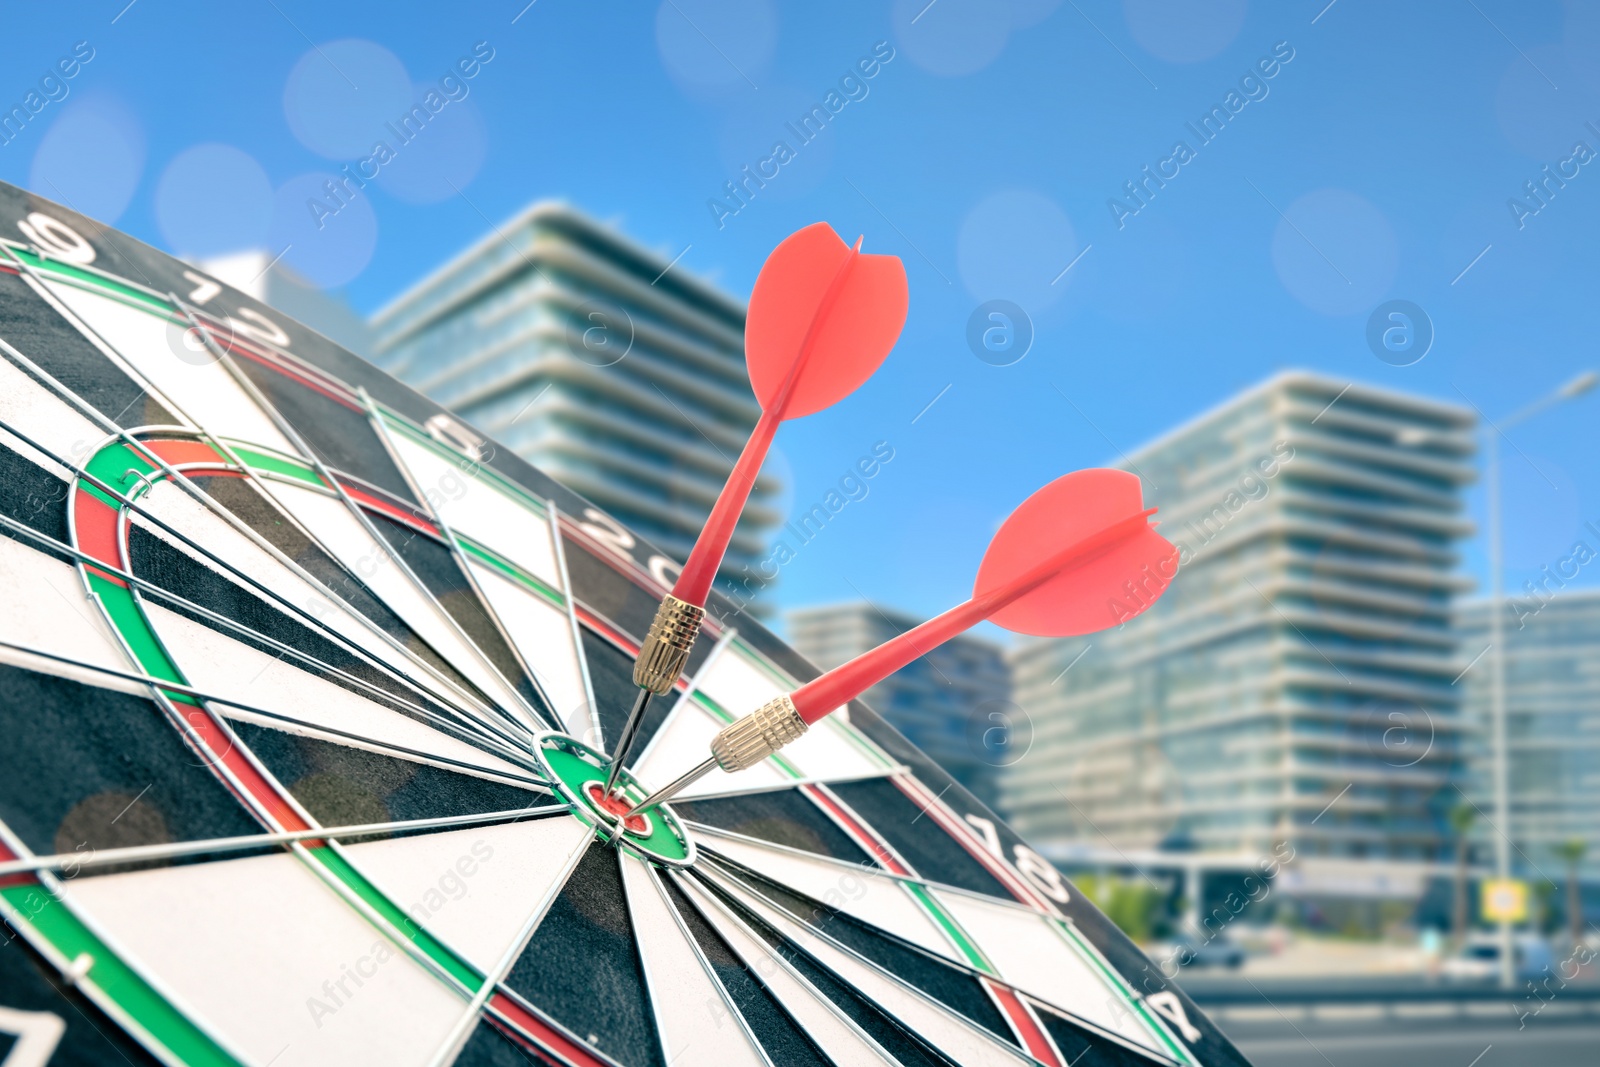 Image of Board with red darts hitting target on blurred view of cityscape